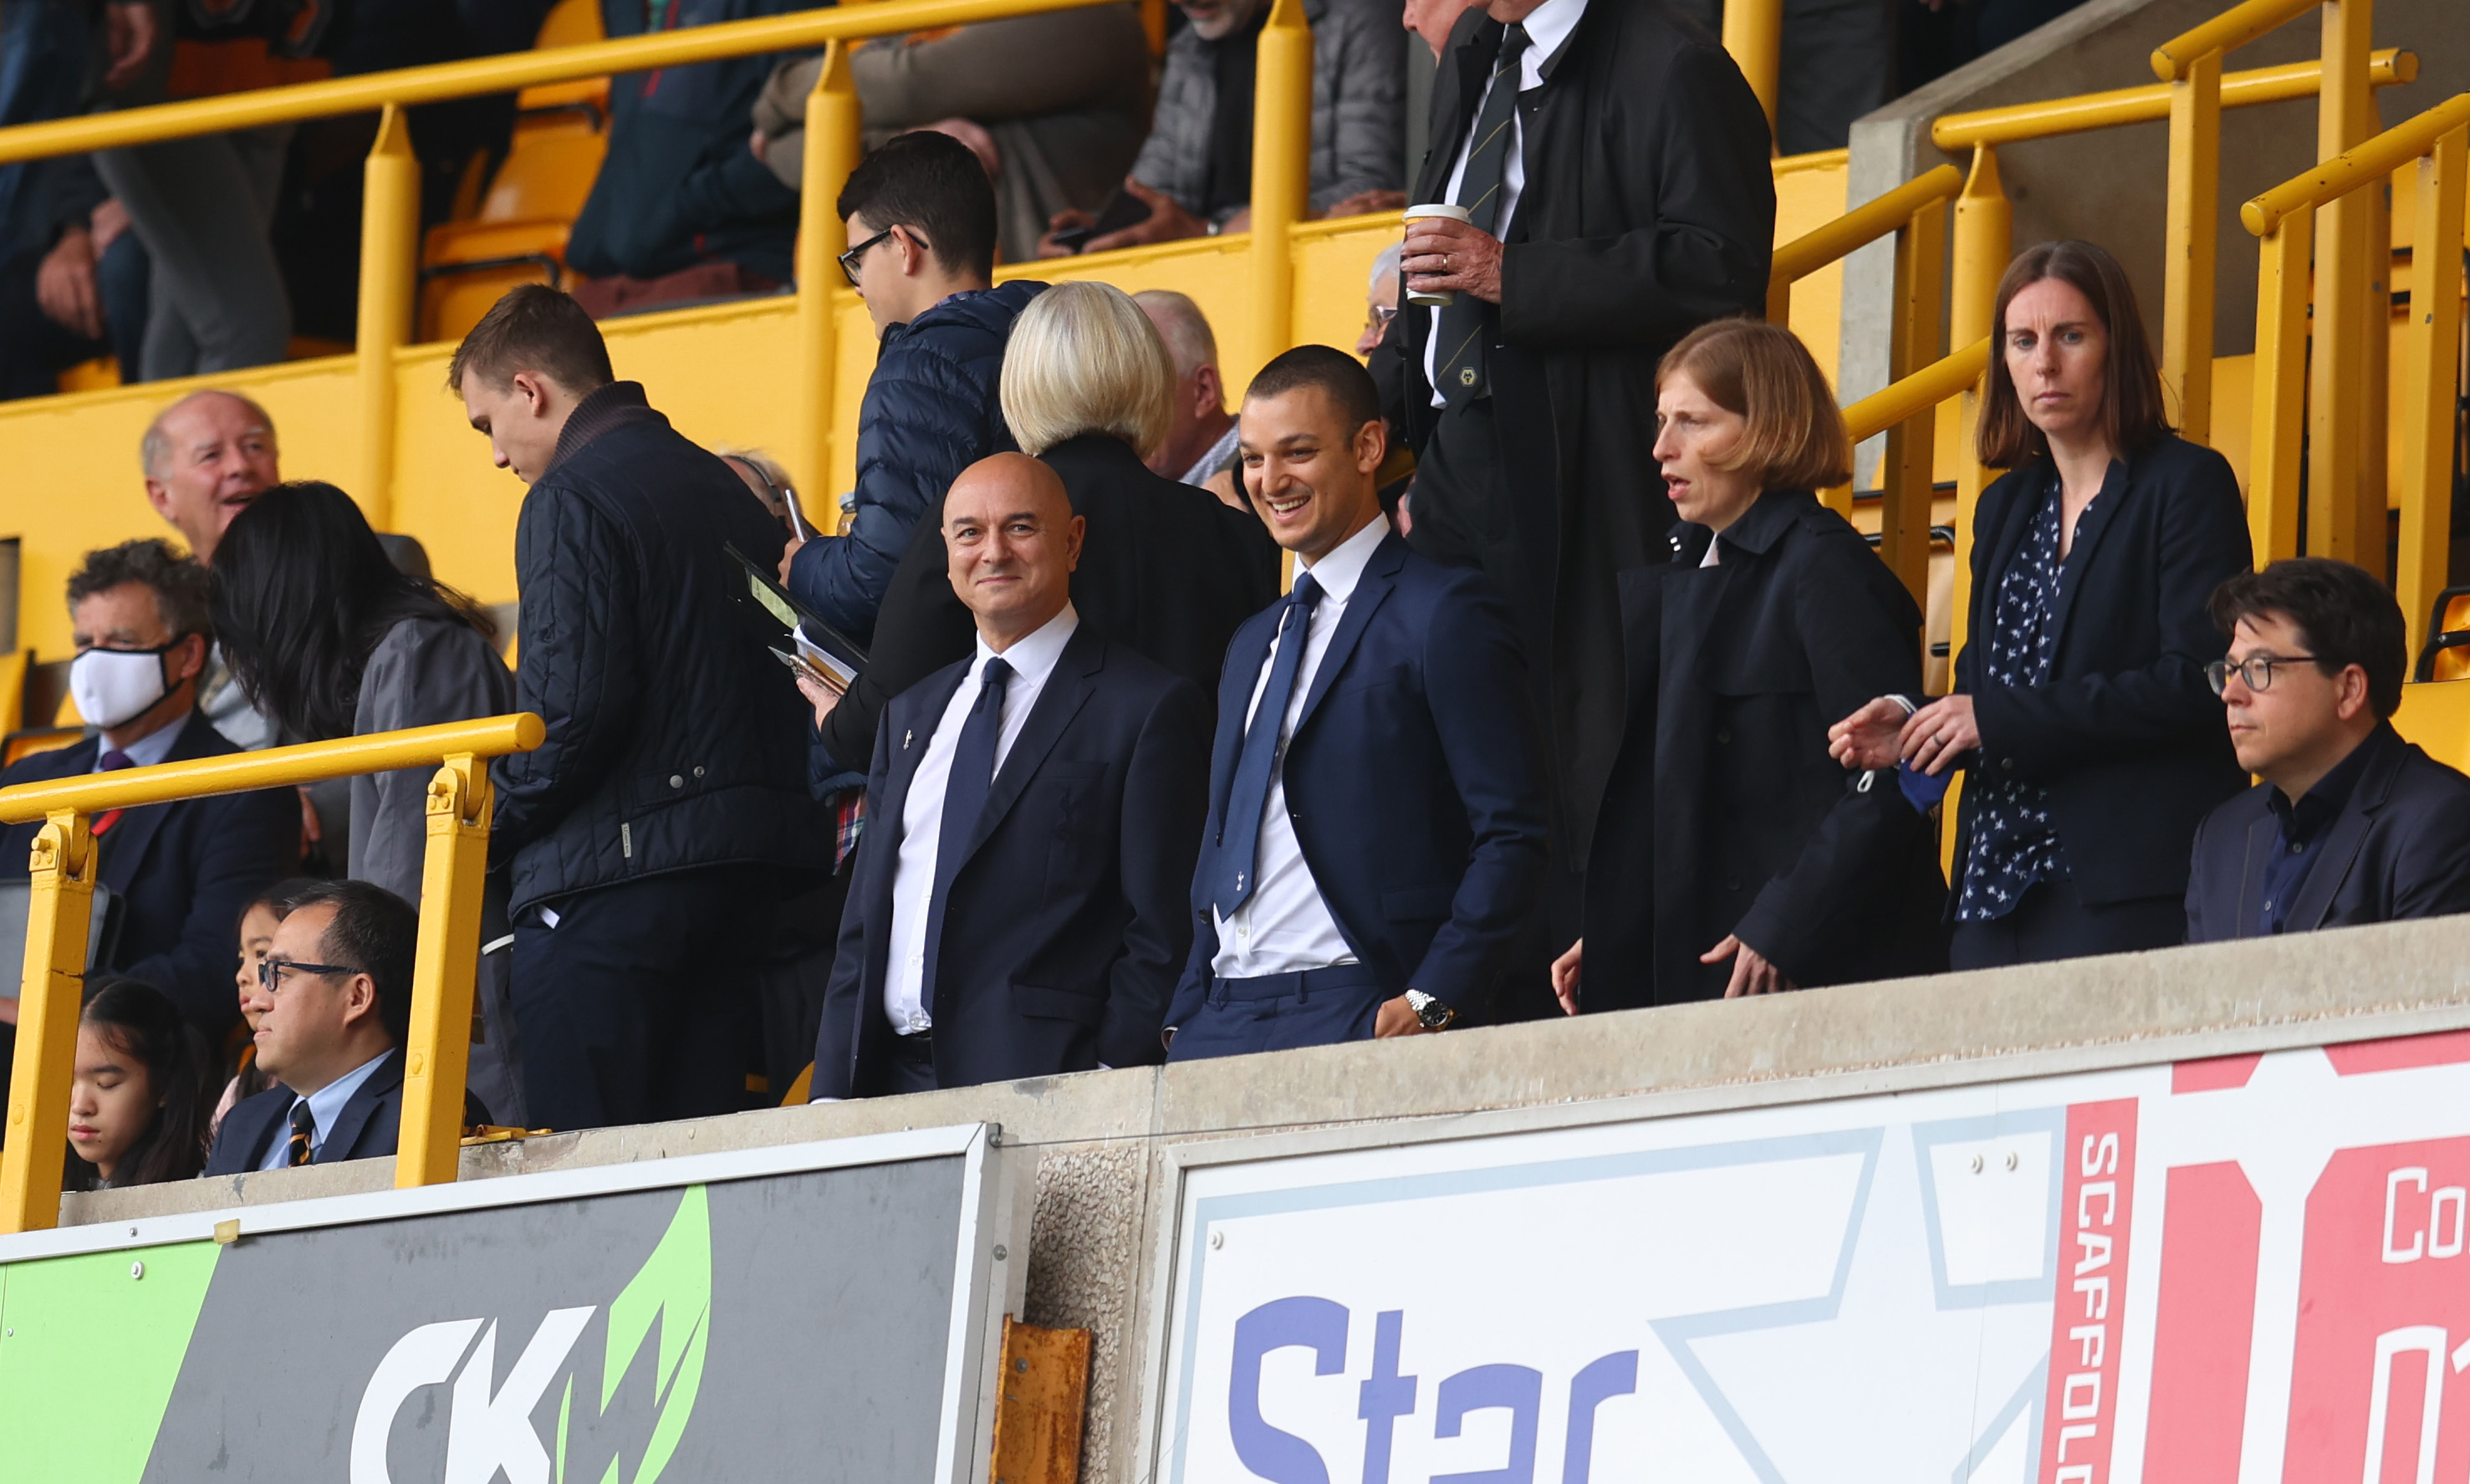 Daniel Levy has been a polarizing figure at Tottenham but his chance for a legacy is upon him